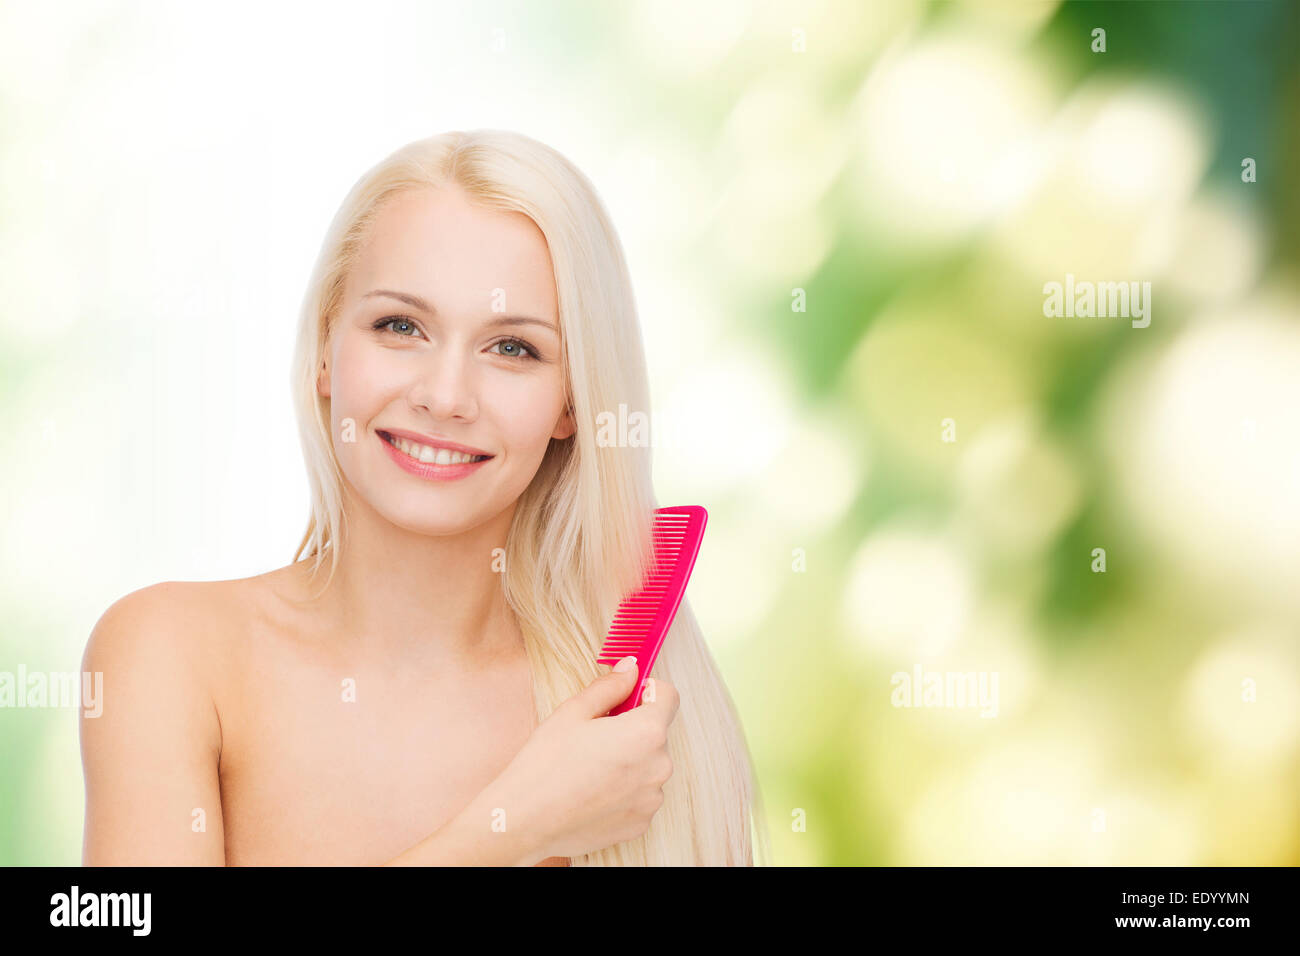 smiling woman with hair brush Stock Photo